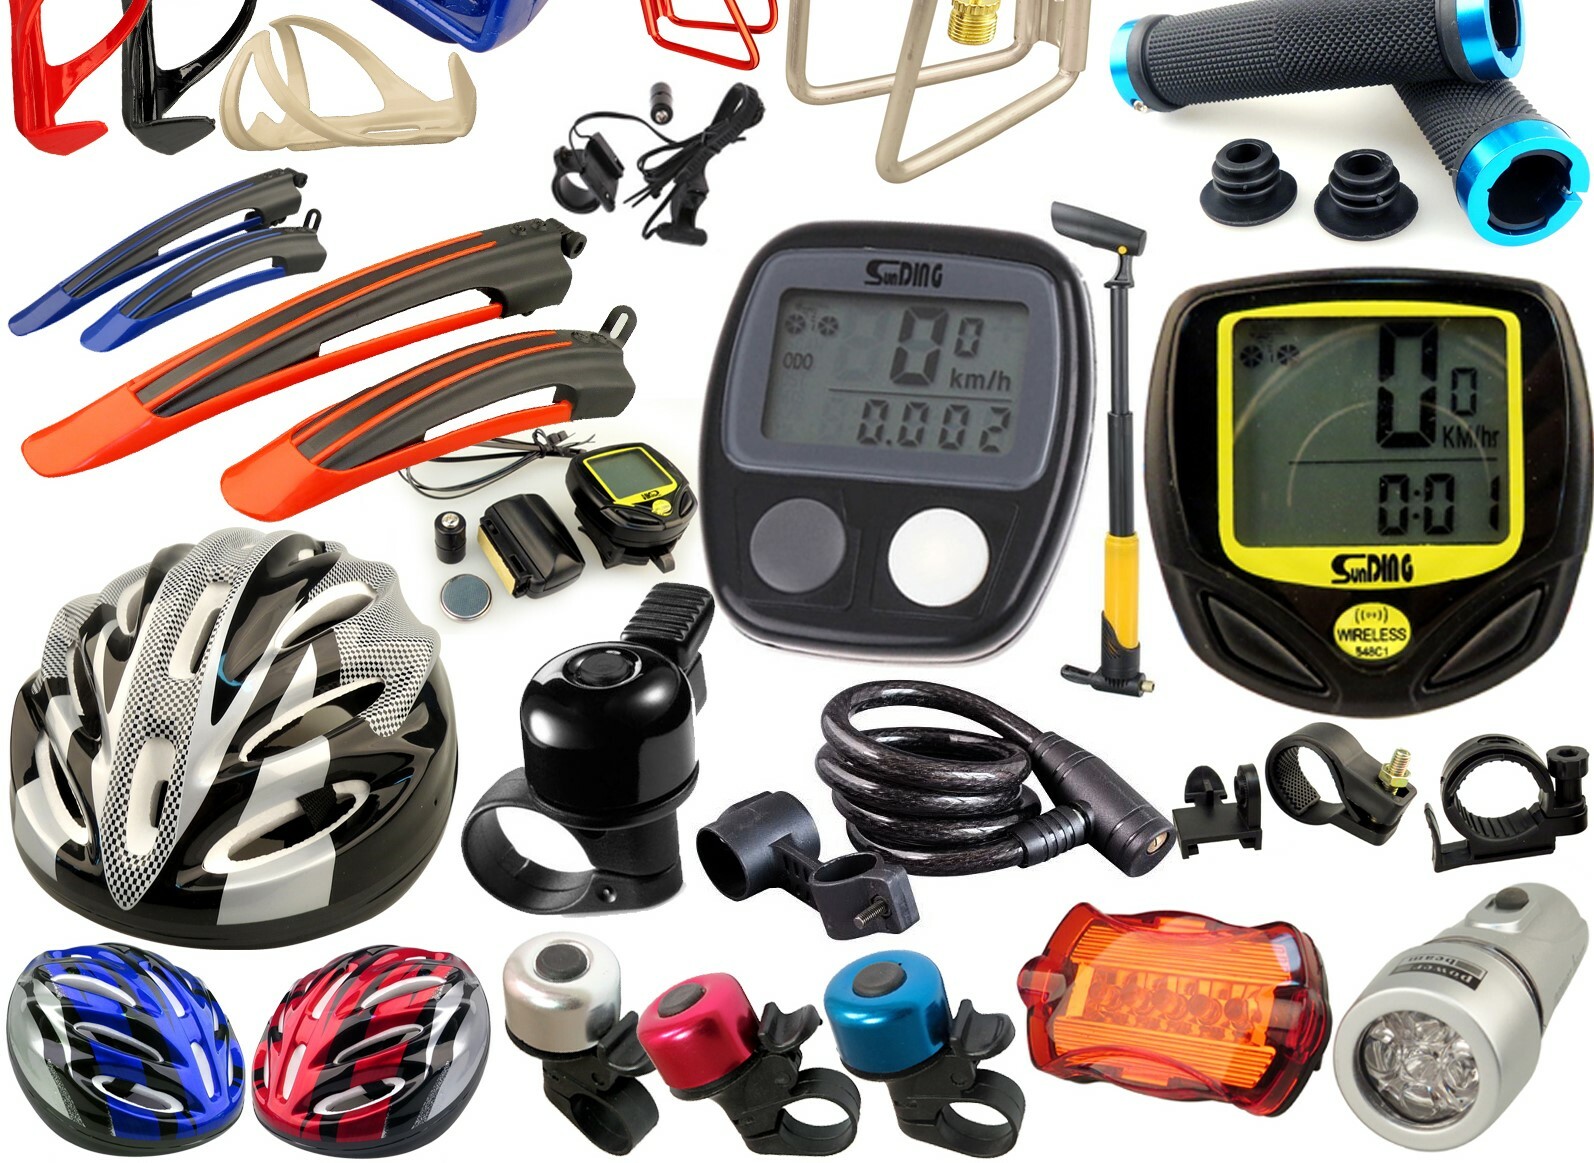 Buying and selling bicycle accessories for an active lifestyle.